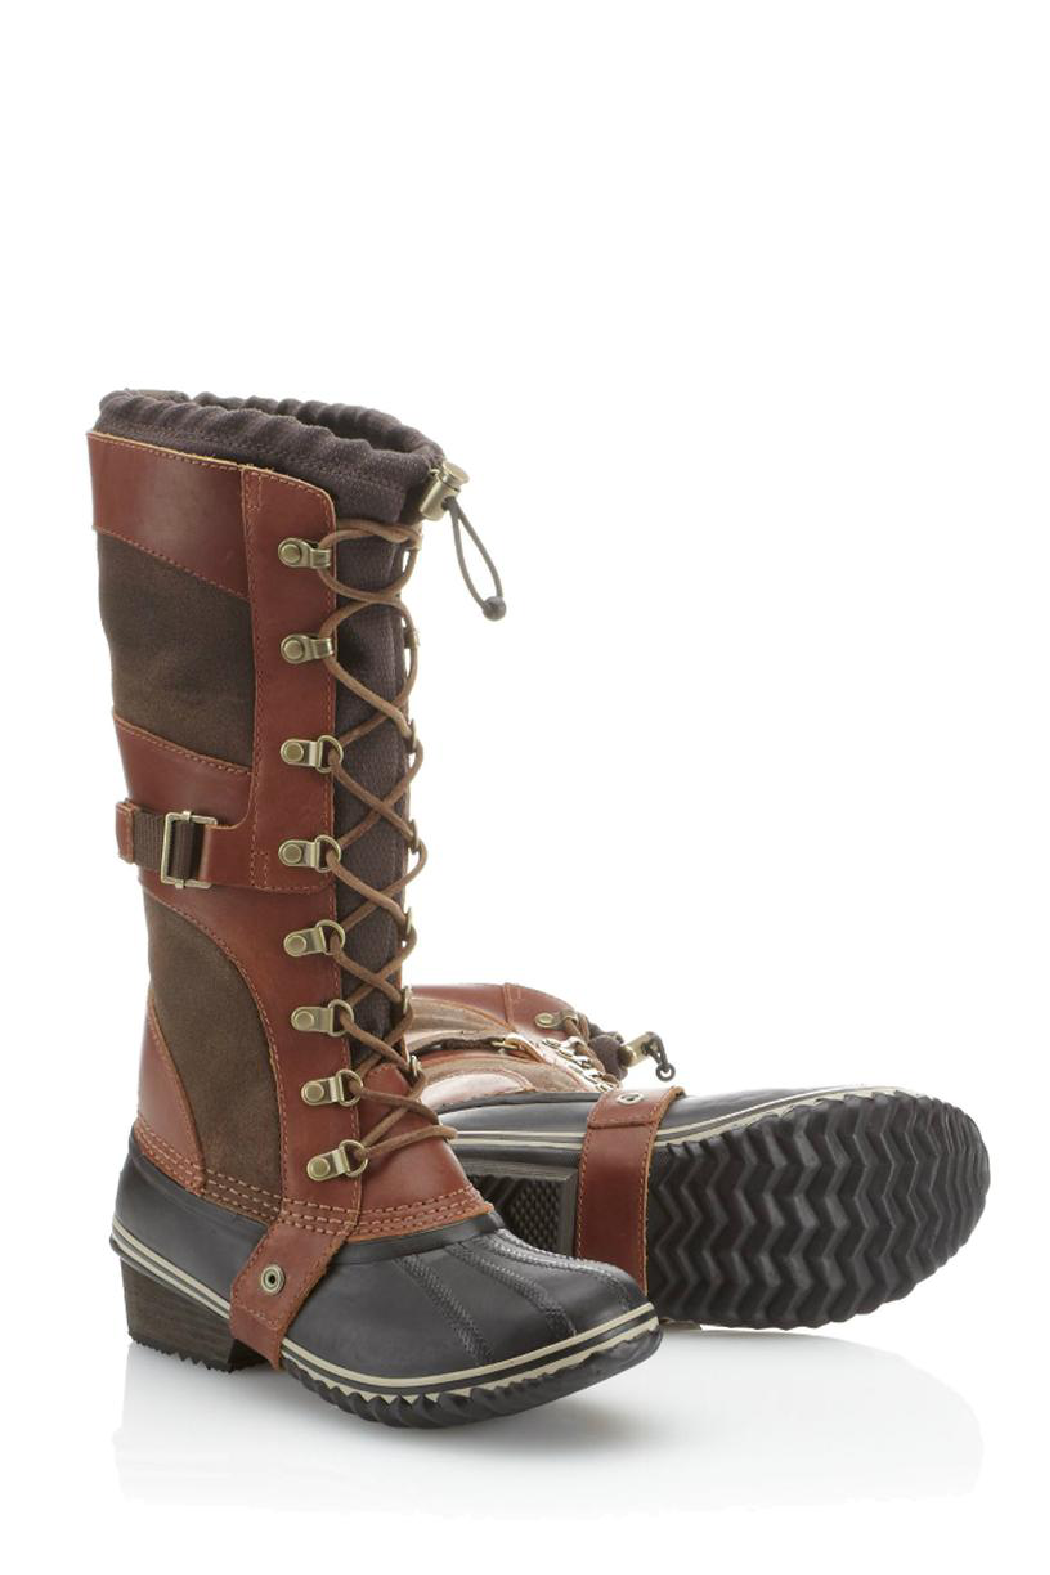 Sorel Conquest Carly Boot